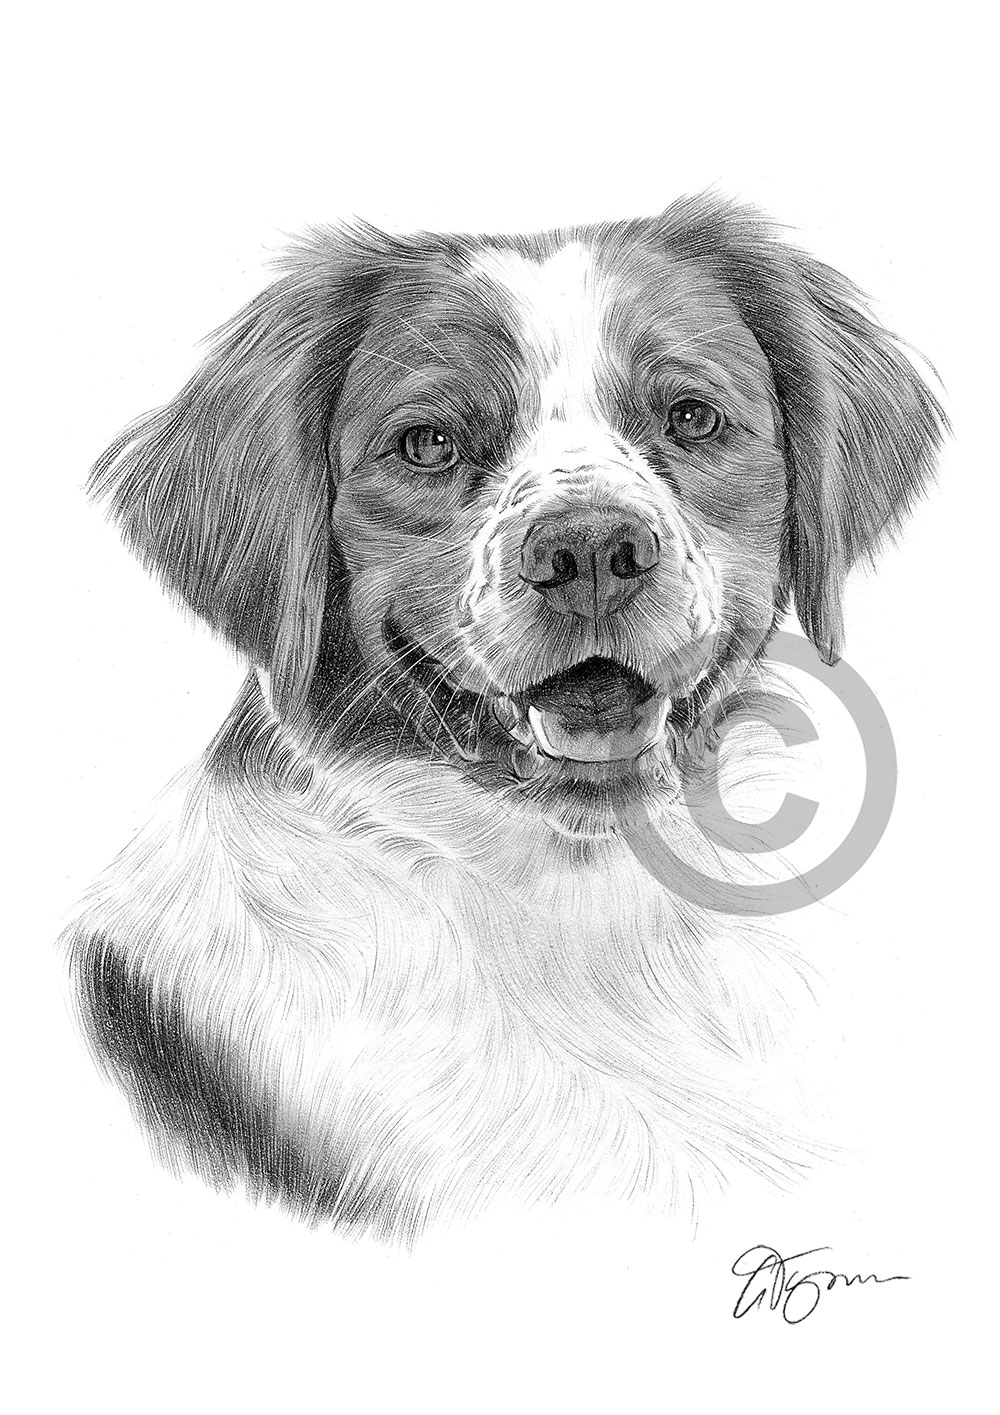 Pencil drawing of a Brittany spaniel by artist Gary Tymon